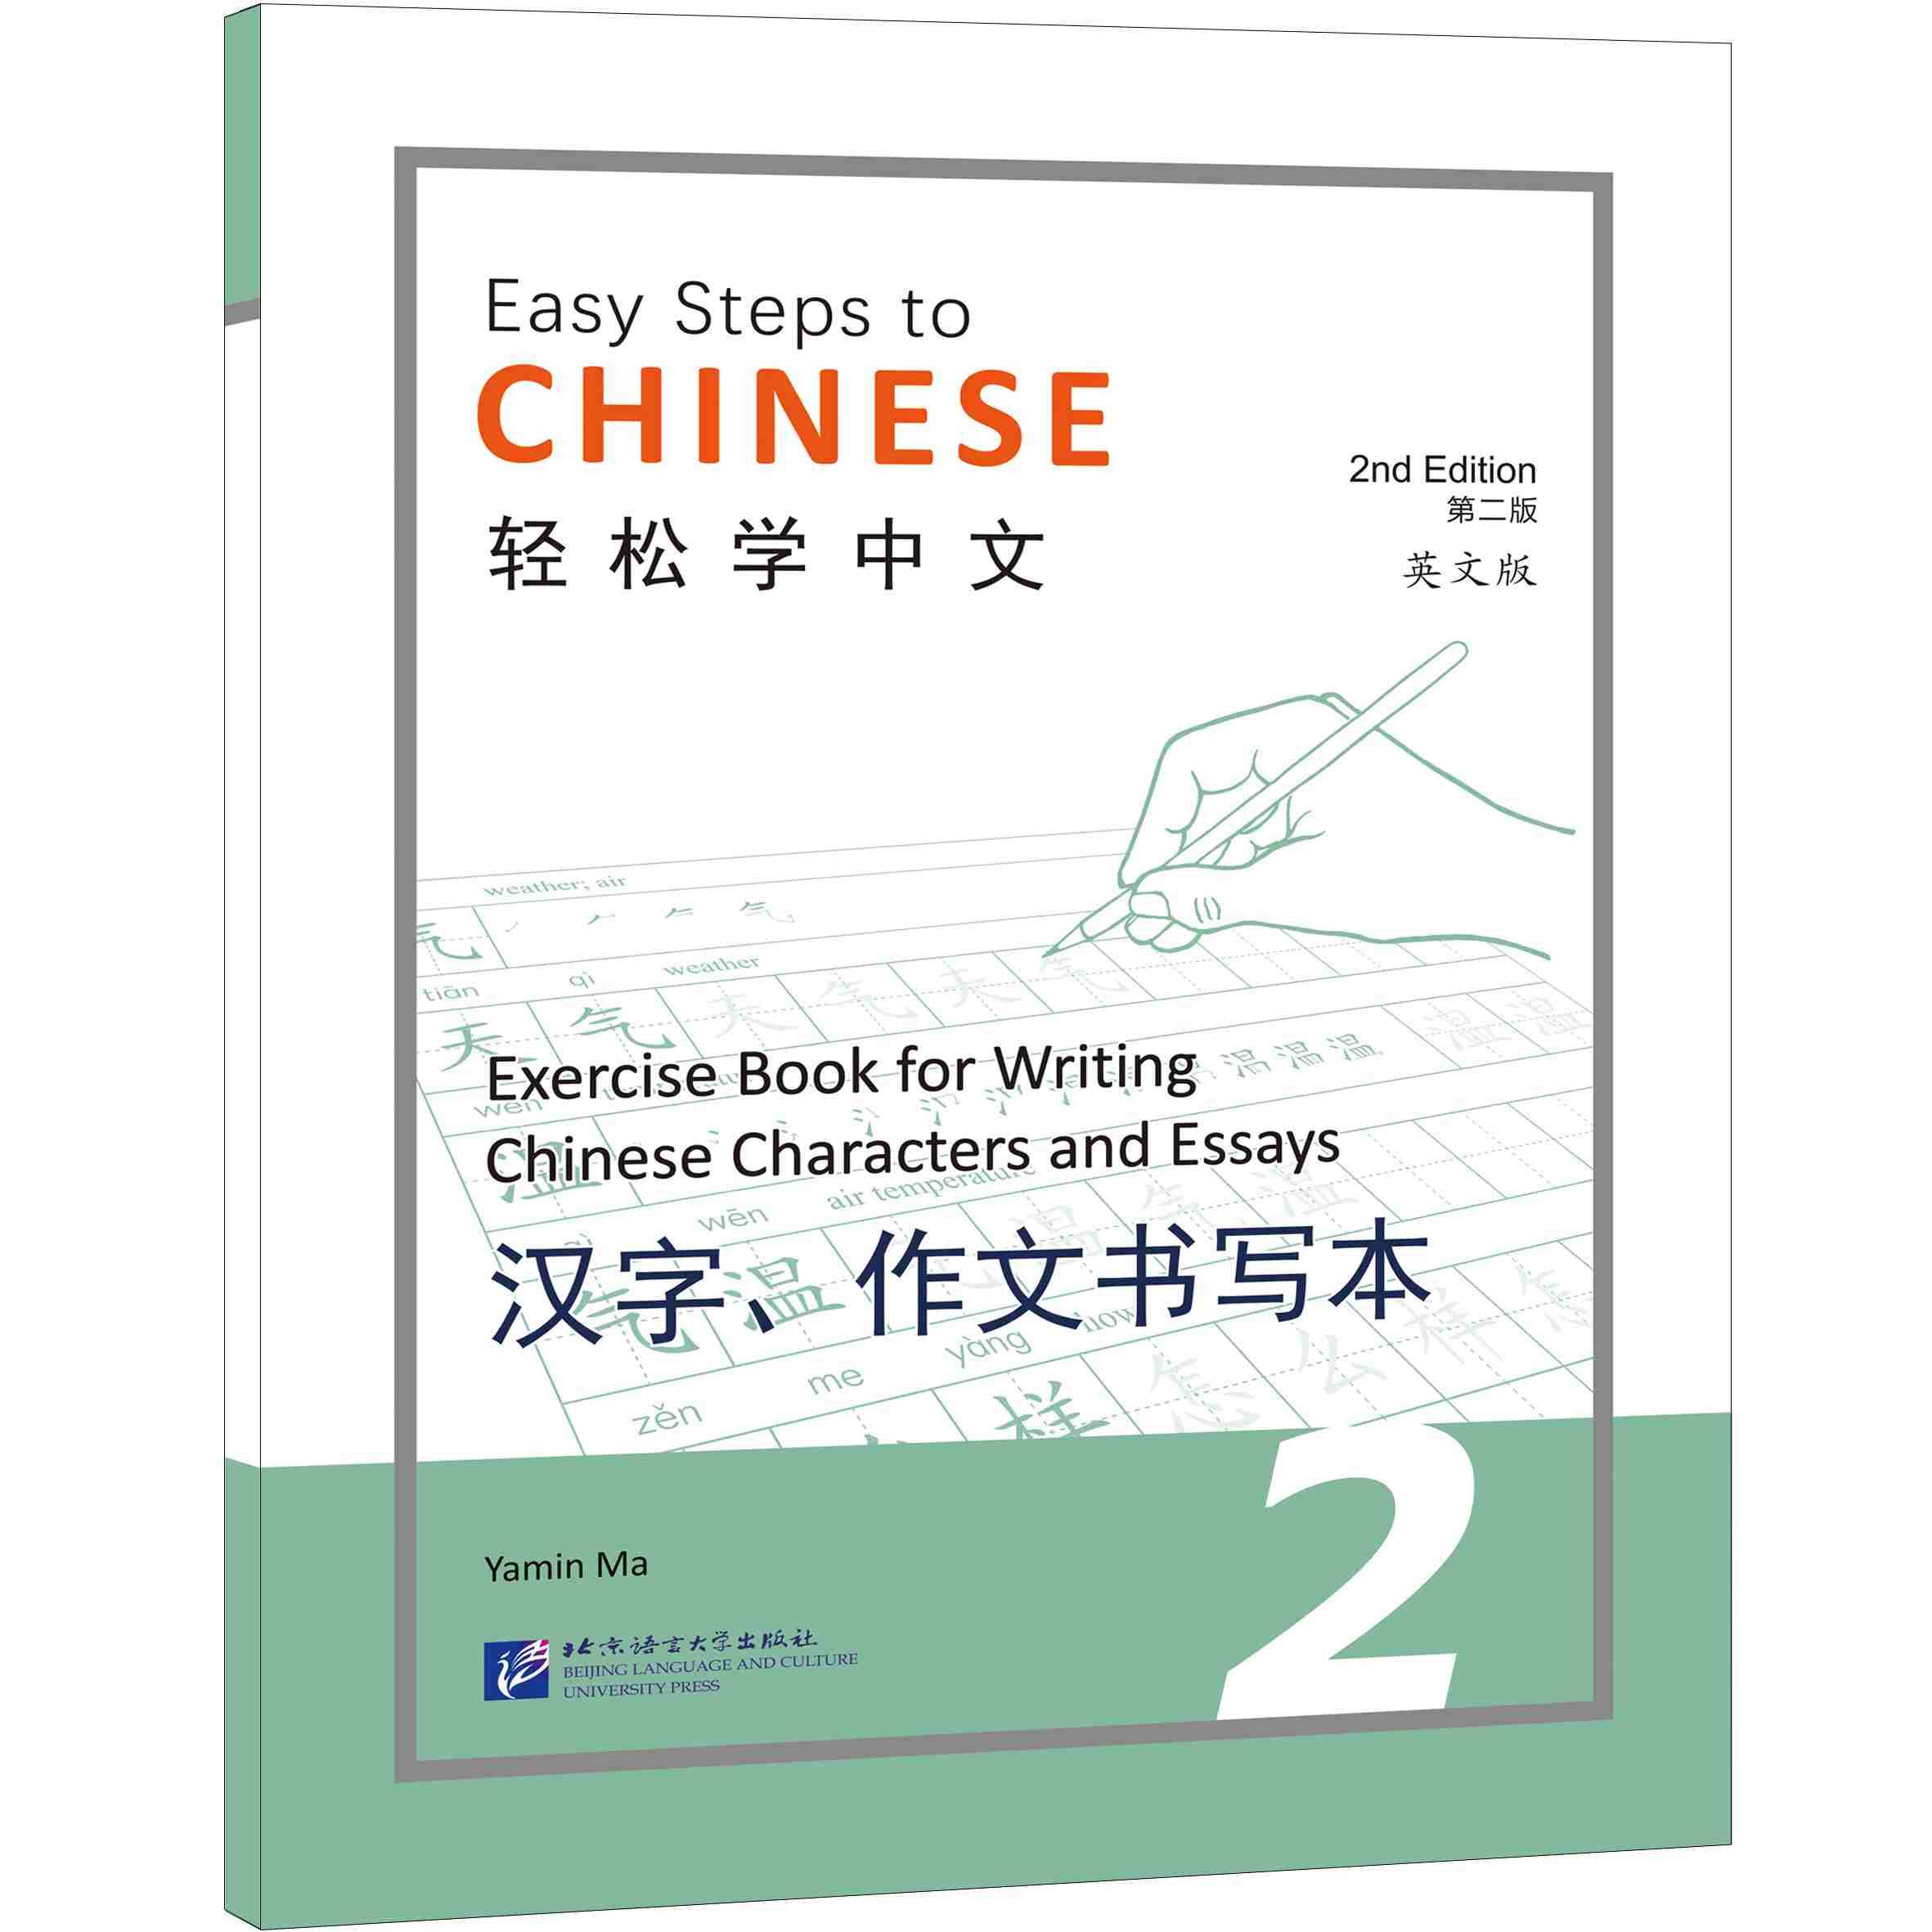 Medicine　Education　for　Chinese　range　Characters　Supplies　and　Chinese　Writing　Book　Exercise　Chinese　Edition):　(2nd　to　Steps　Easy　Essays